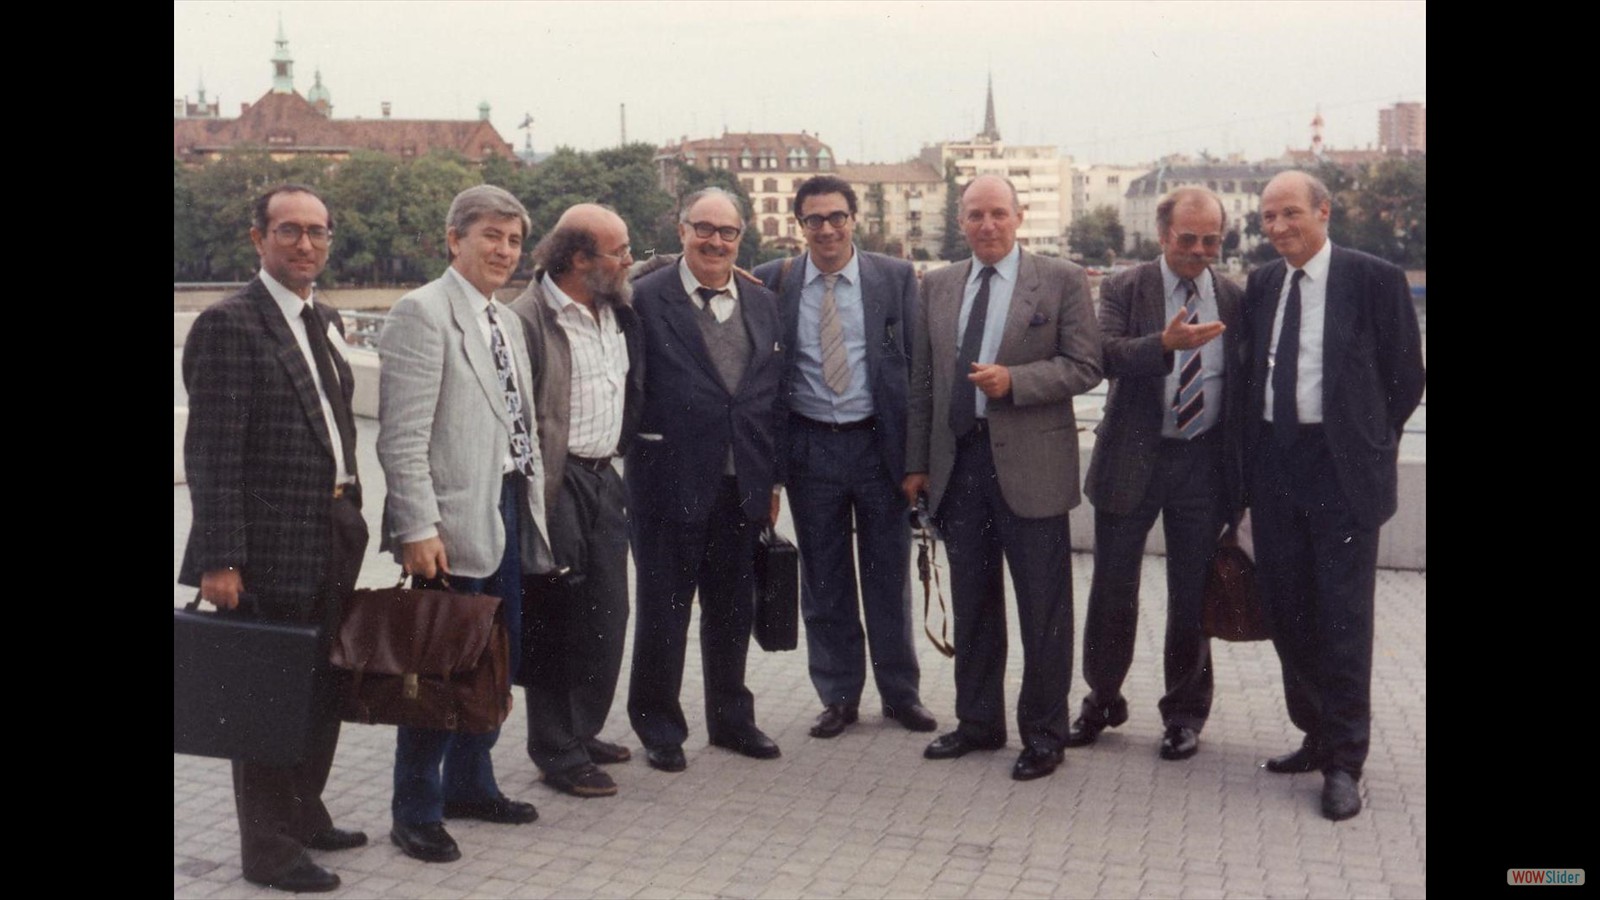 AFCAT-AICAT-STK Joint Conference - Basel September 17-21 1989 (in the group we recognize first, second and fourth from the left Abate, Della Gatta, Barone)